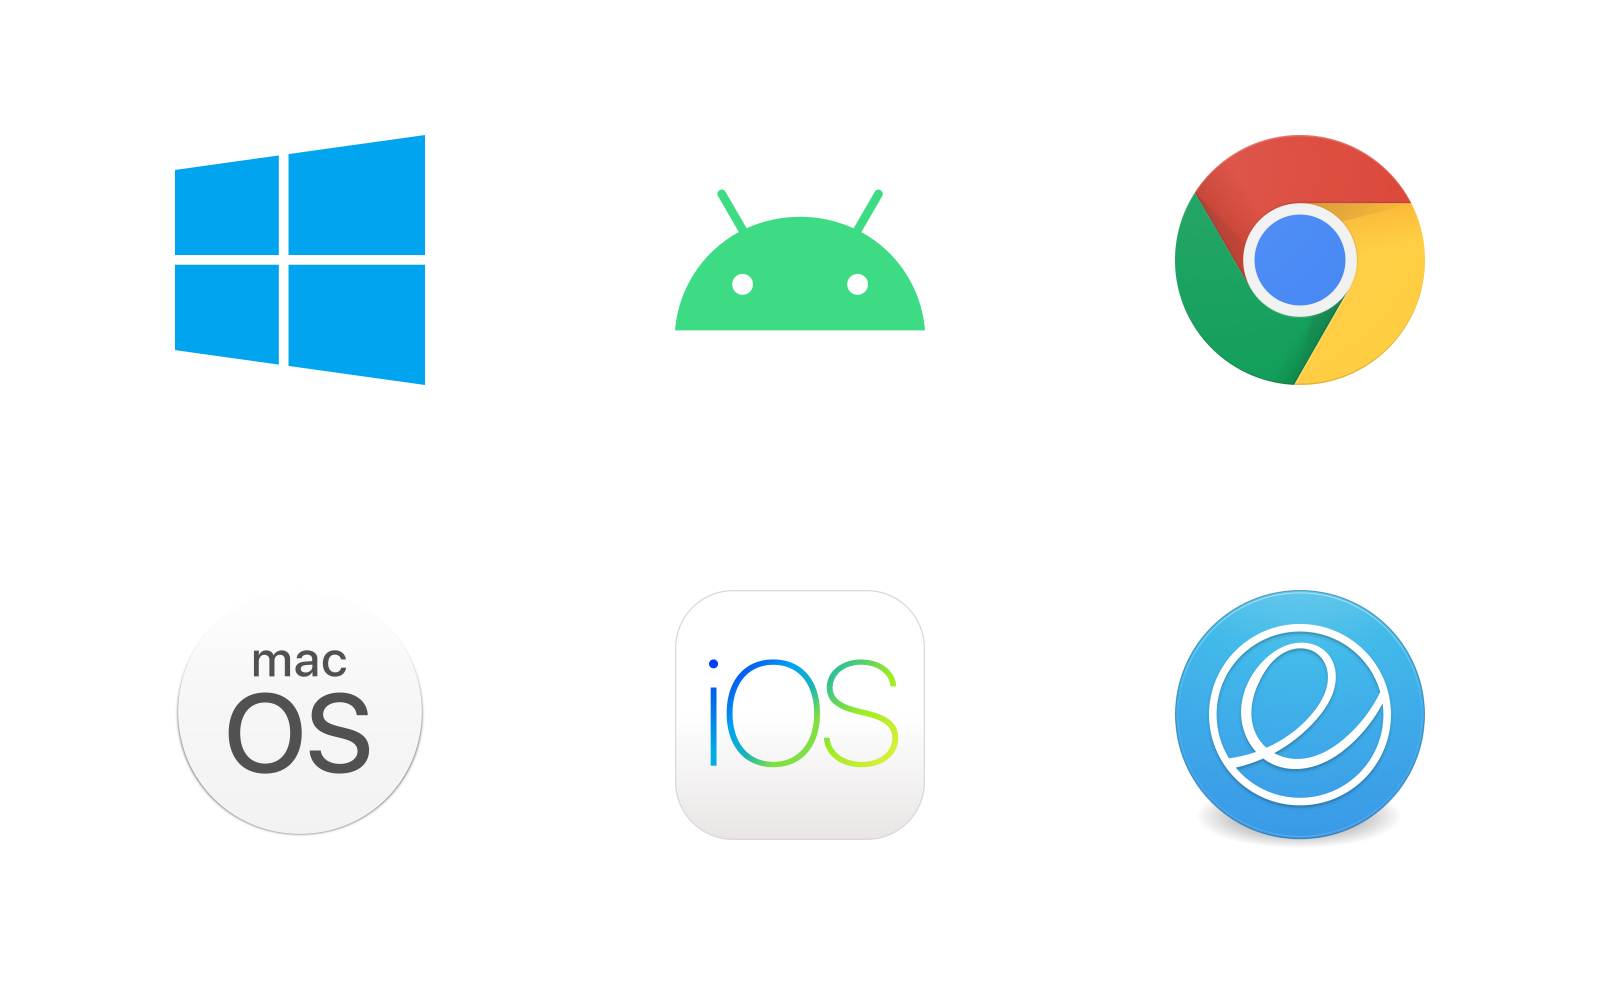 Logos of Windows, Android, Chrome OS, macOS, iOS, and elementary OS